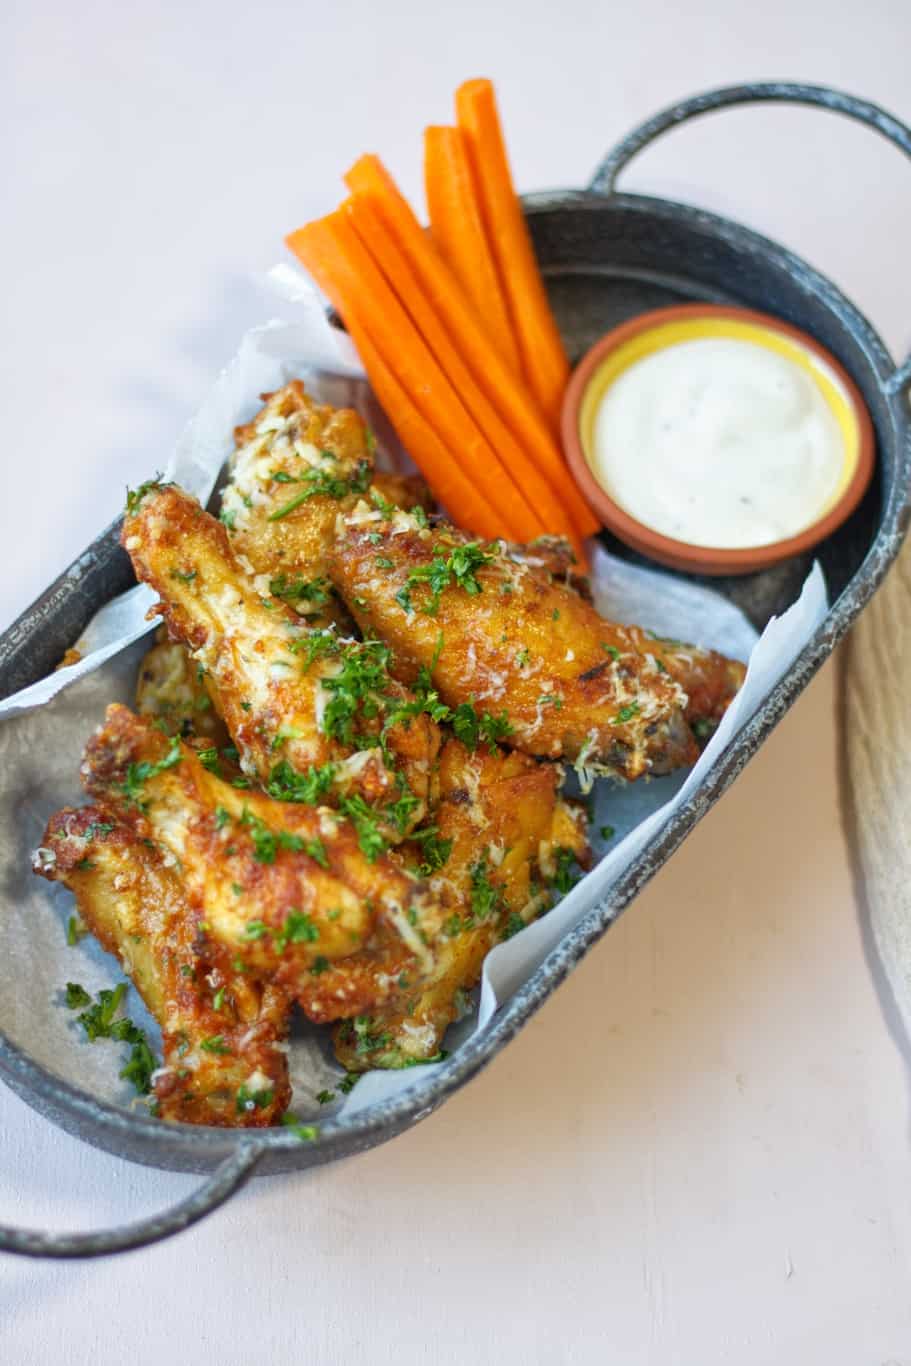 sprinkle your garlic parmesan wings made in the air fryer with finely chopped fresh parsley and serve them alongside roasted carrots and garlic Parmesan sauce